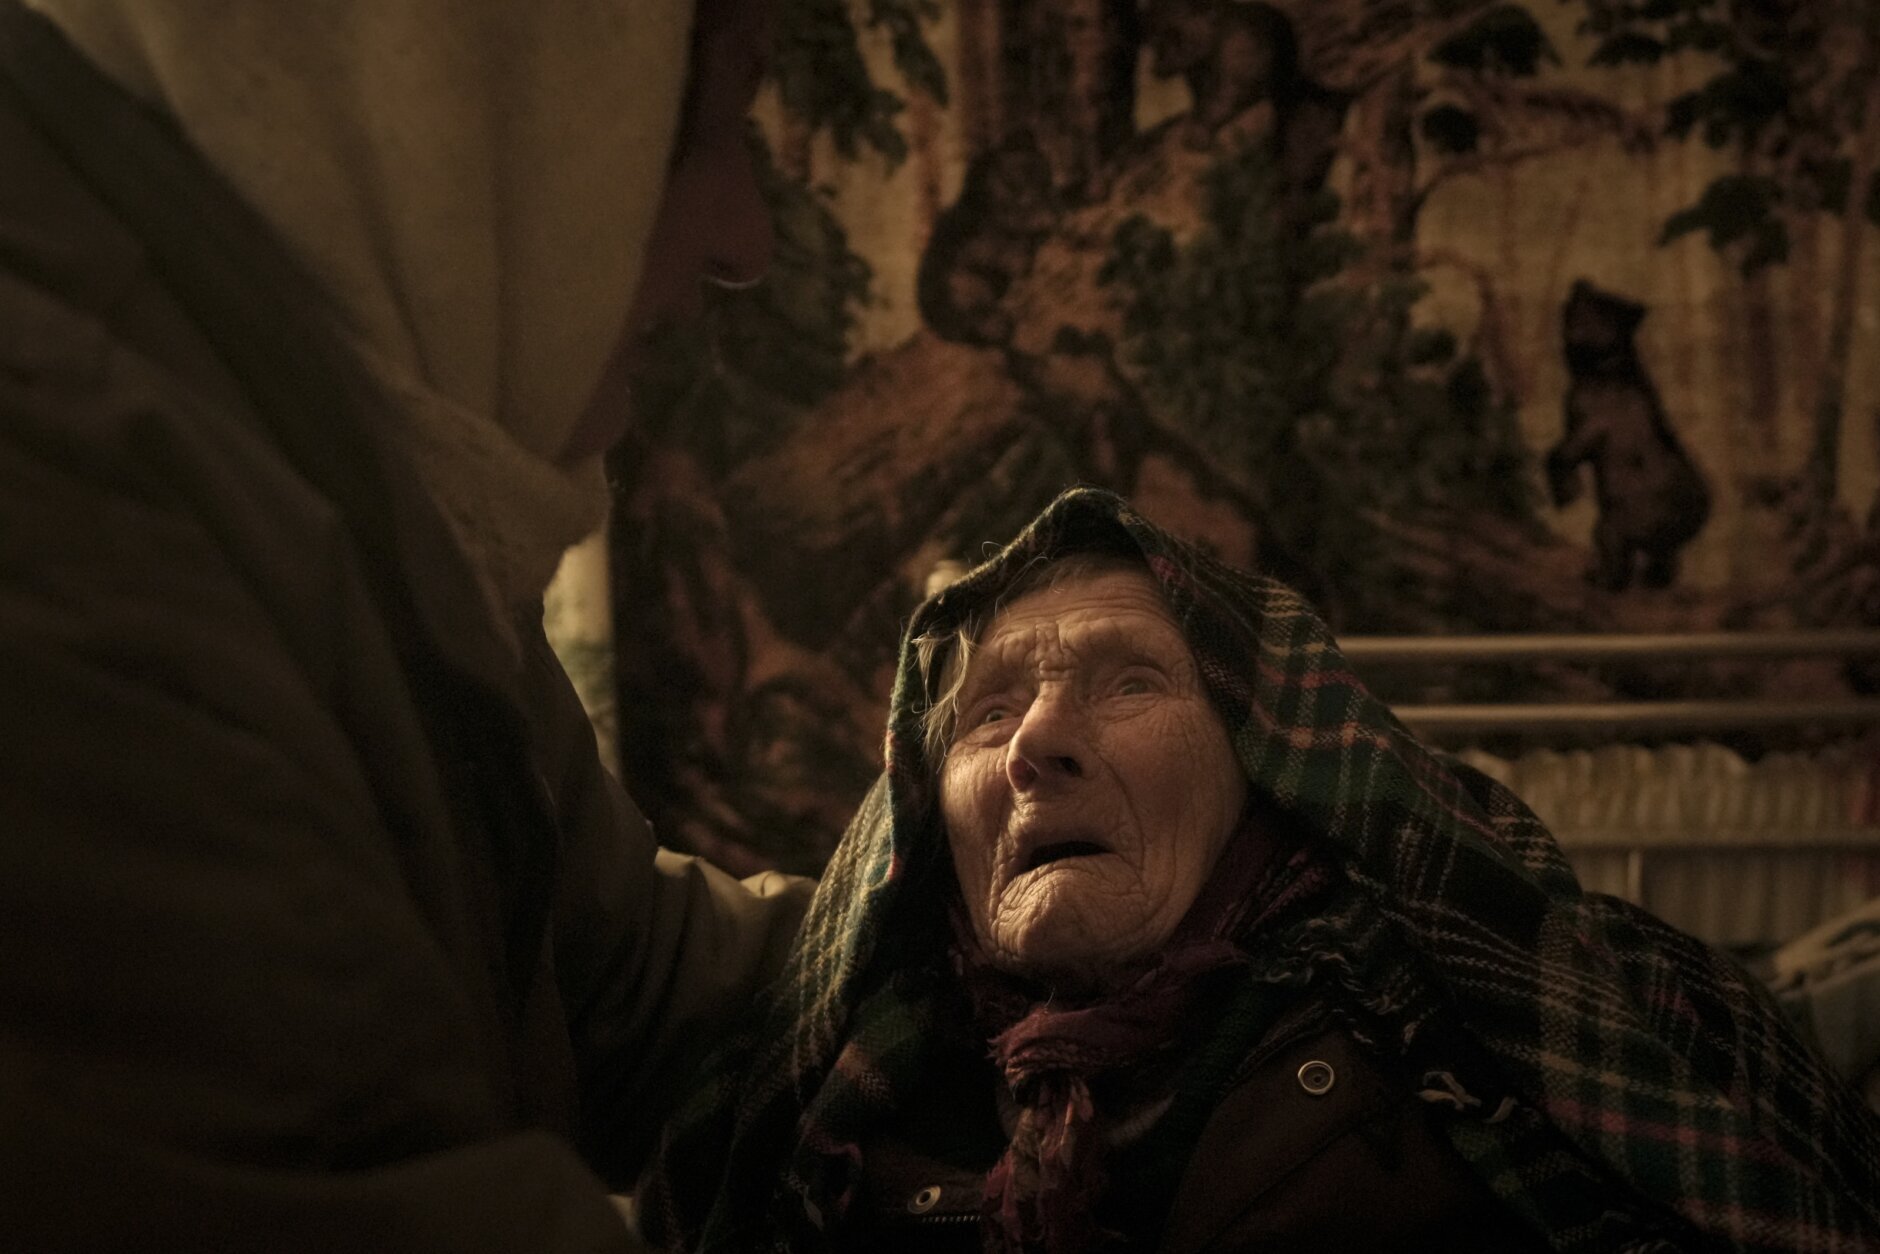 Motria Oleksiienko, 99, traumatized by the Russian occupation, is comforted by Tetiana Oleksiienko in a room without heating in the village of Andriivka, Ukraine, heavily affected by fighting between Russian and Ukrainian forces, Wednesday, April 6, 2022. Several buildings in the village were reduced to mounds of bricks and corrugated metal and residents struggle without heat, electricity or cooking gas. (AP Photo/Vadim Ghirda)